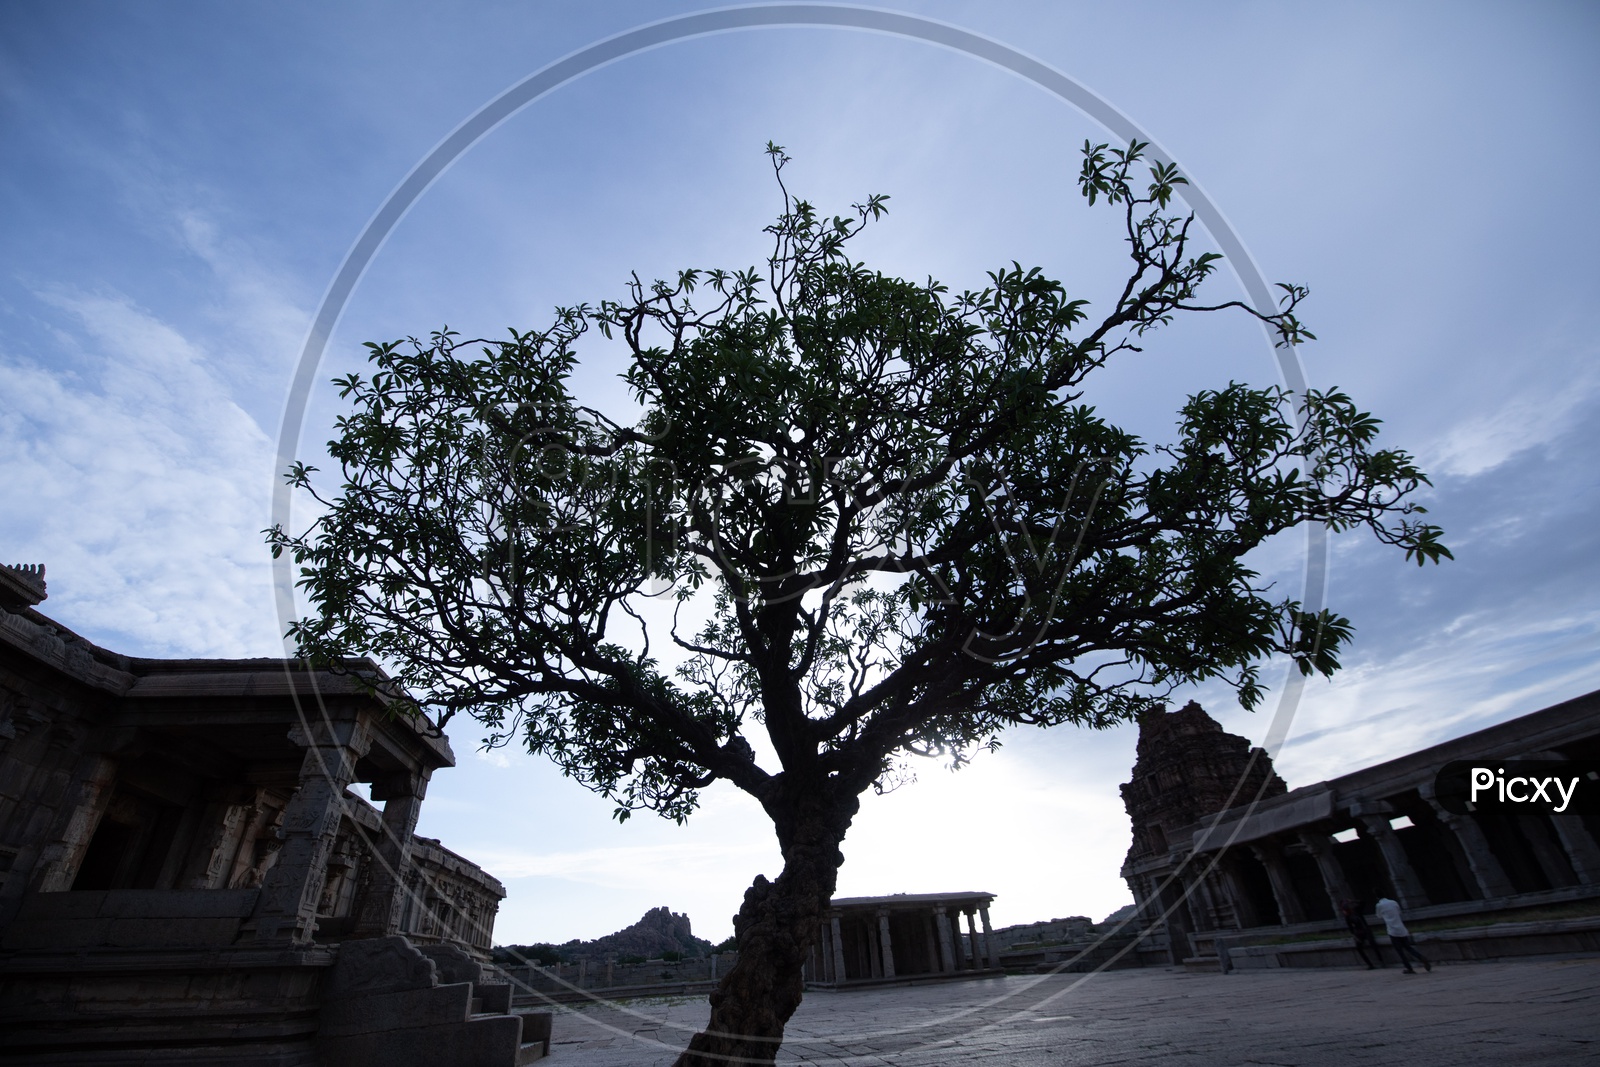 Silhouette Of a Tree In An Ancient Vijaya Vittala temple Compound In Hampi